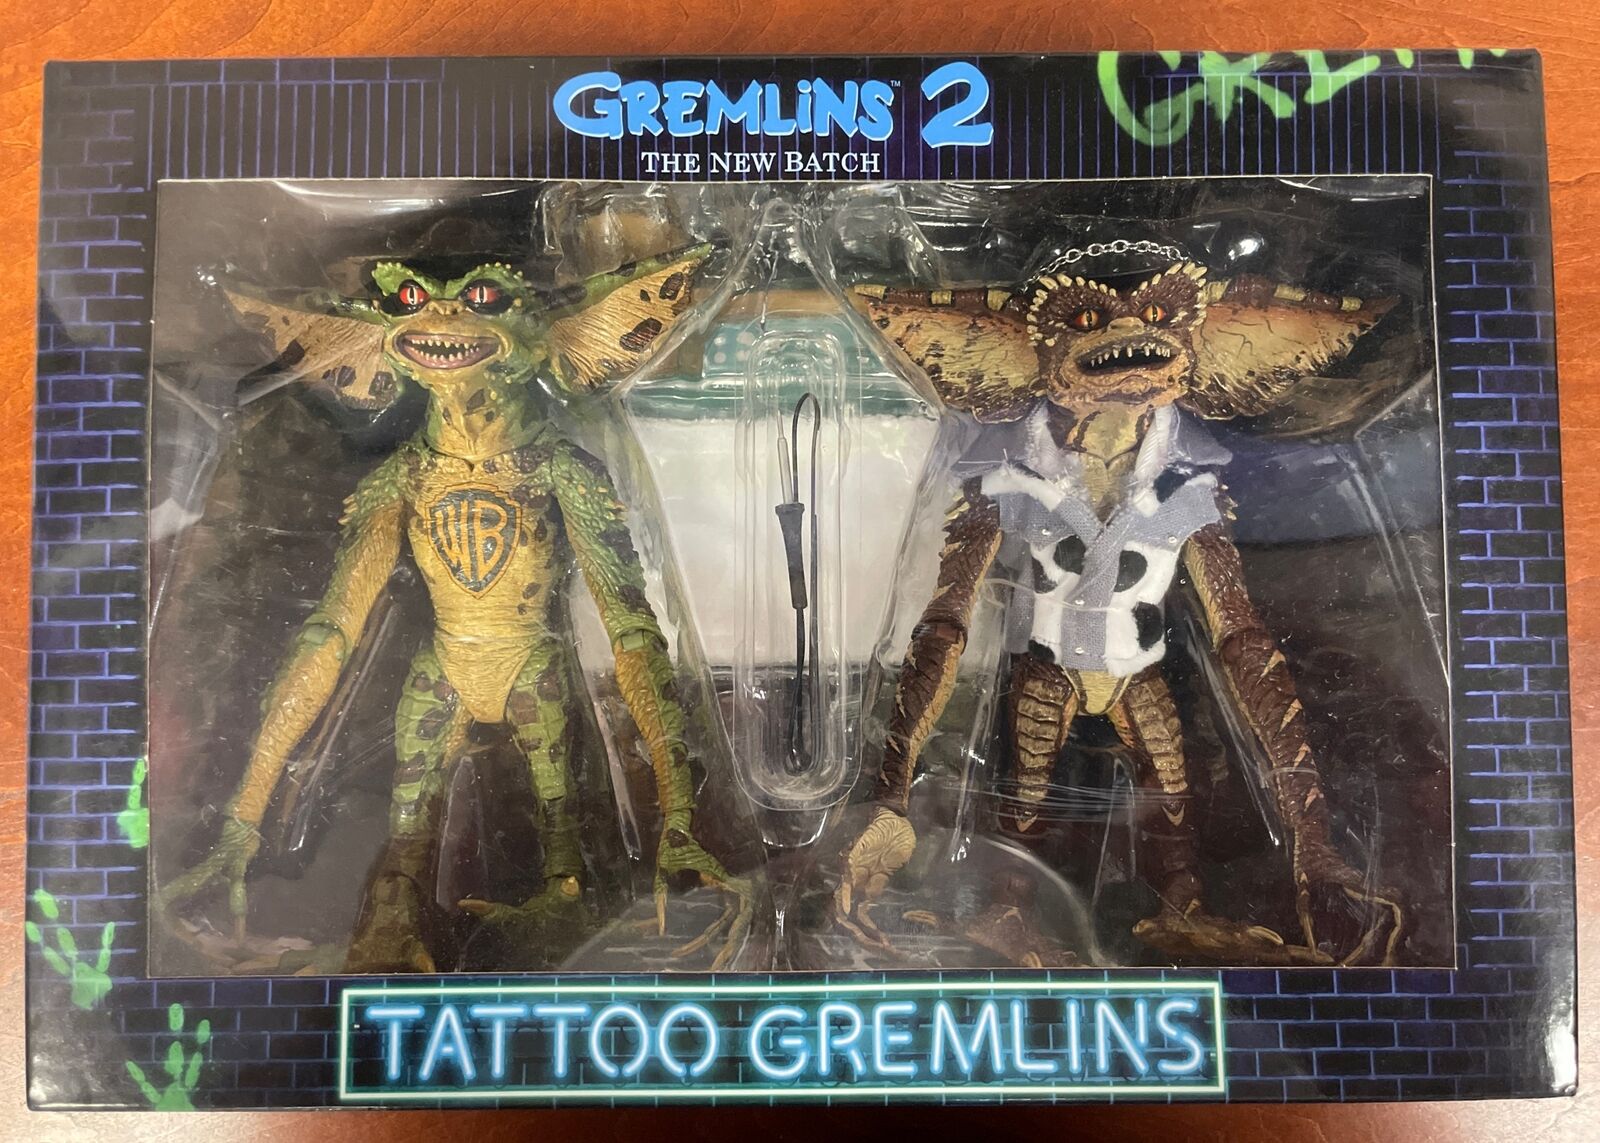 TATTOO GREMLINS 2 TWO PACK NEW BATCH NECA REEL TOYS 1:10 ACTION FIGURE SEALED